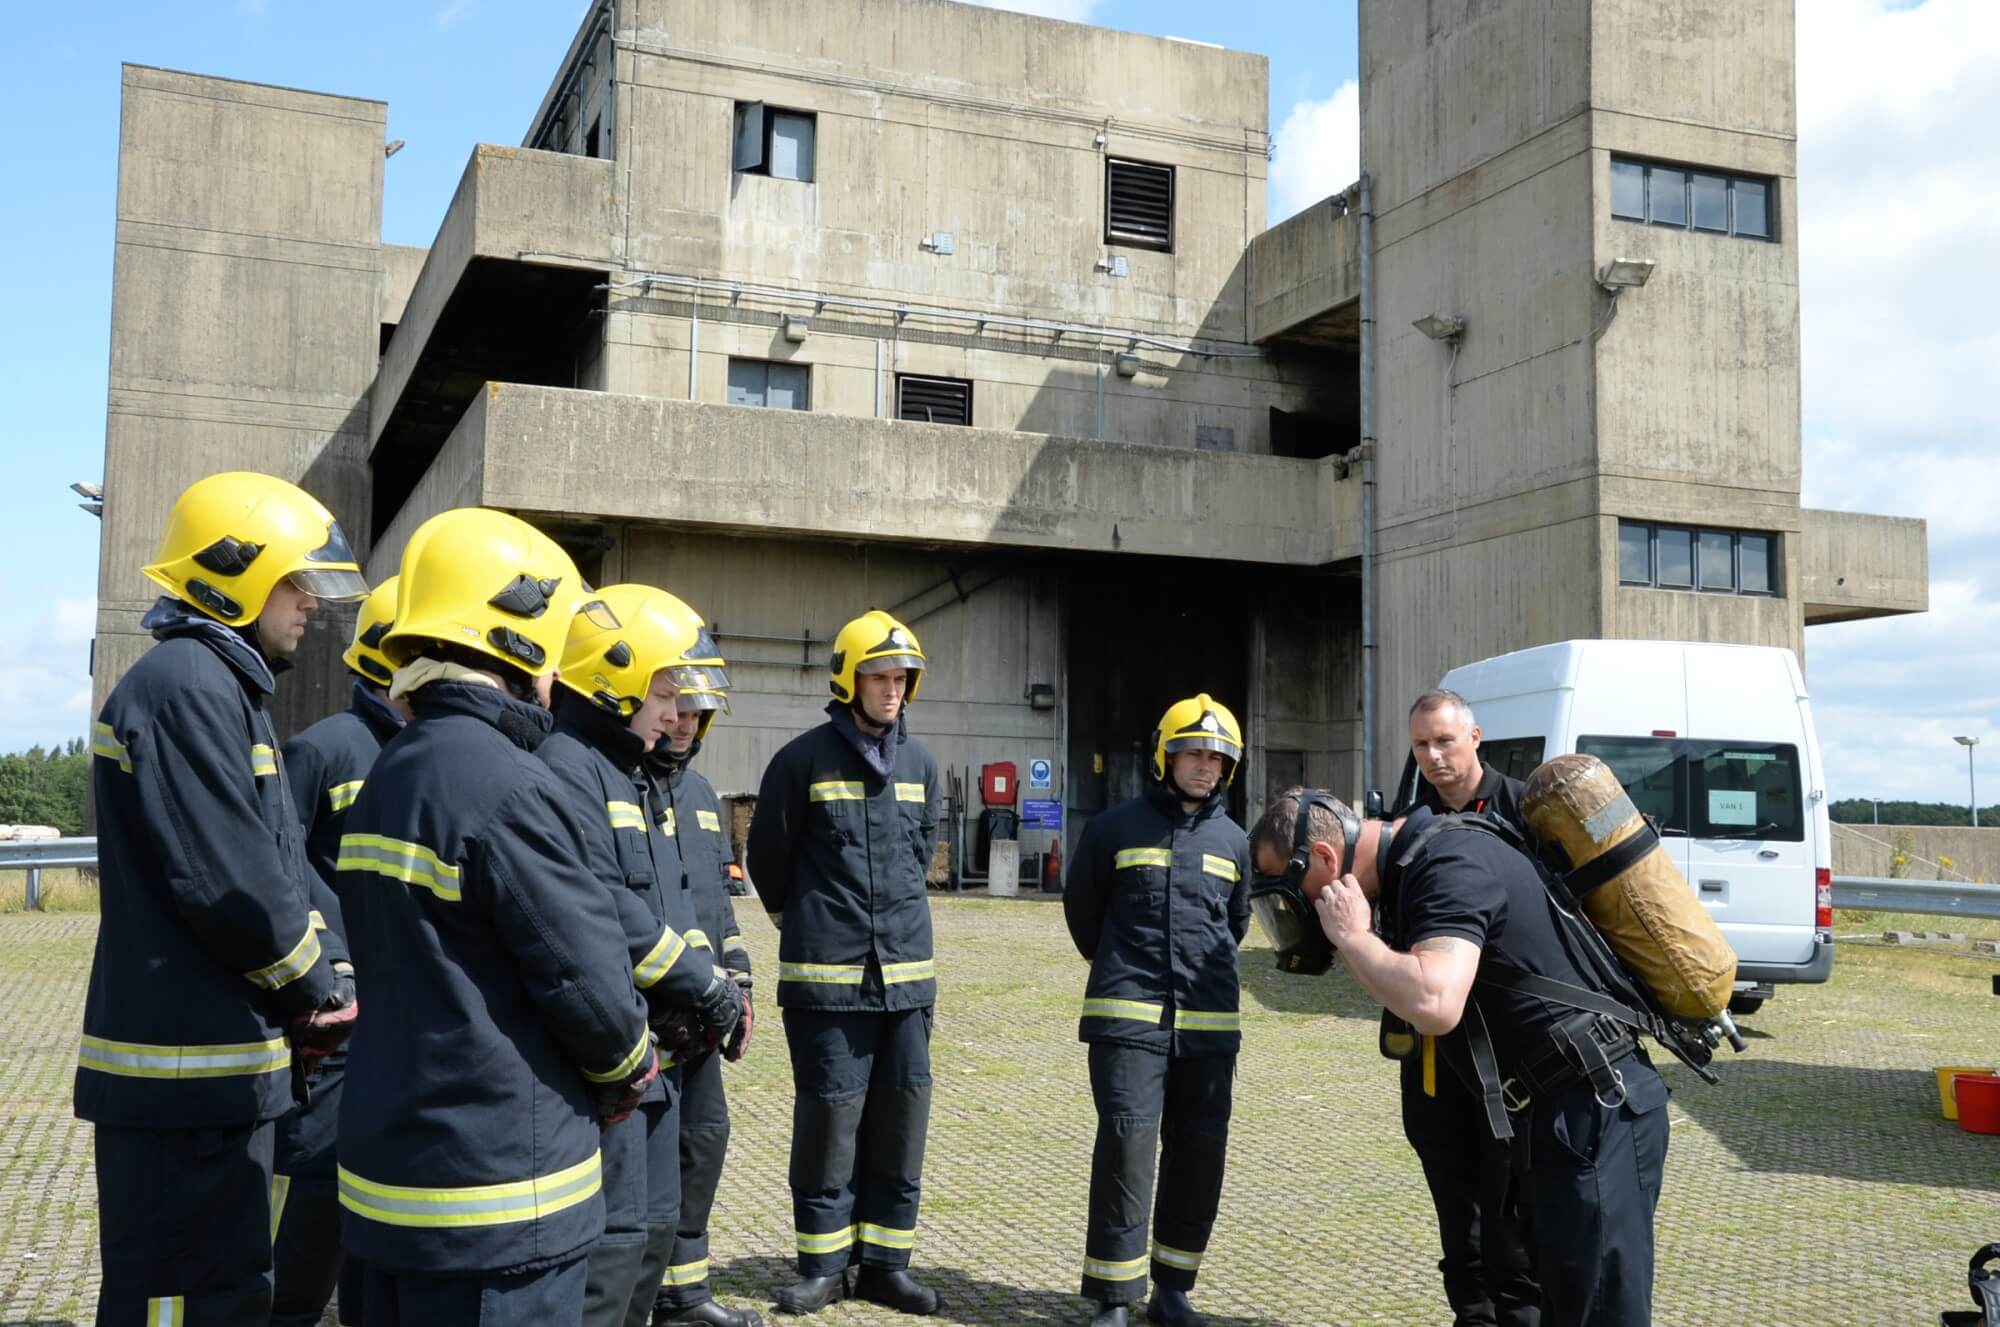 Firefighter trainees watching instructor in breathing apparatus